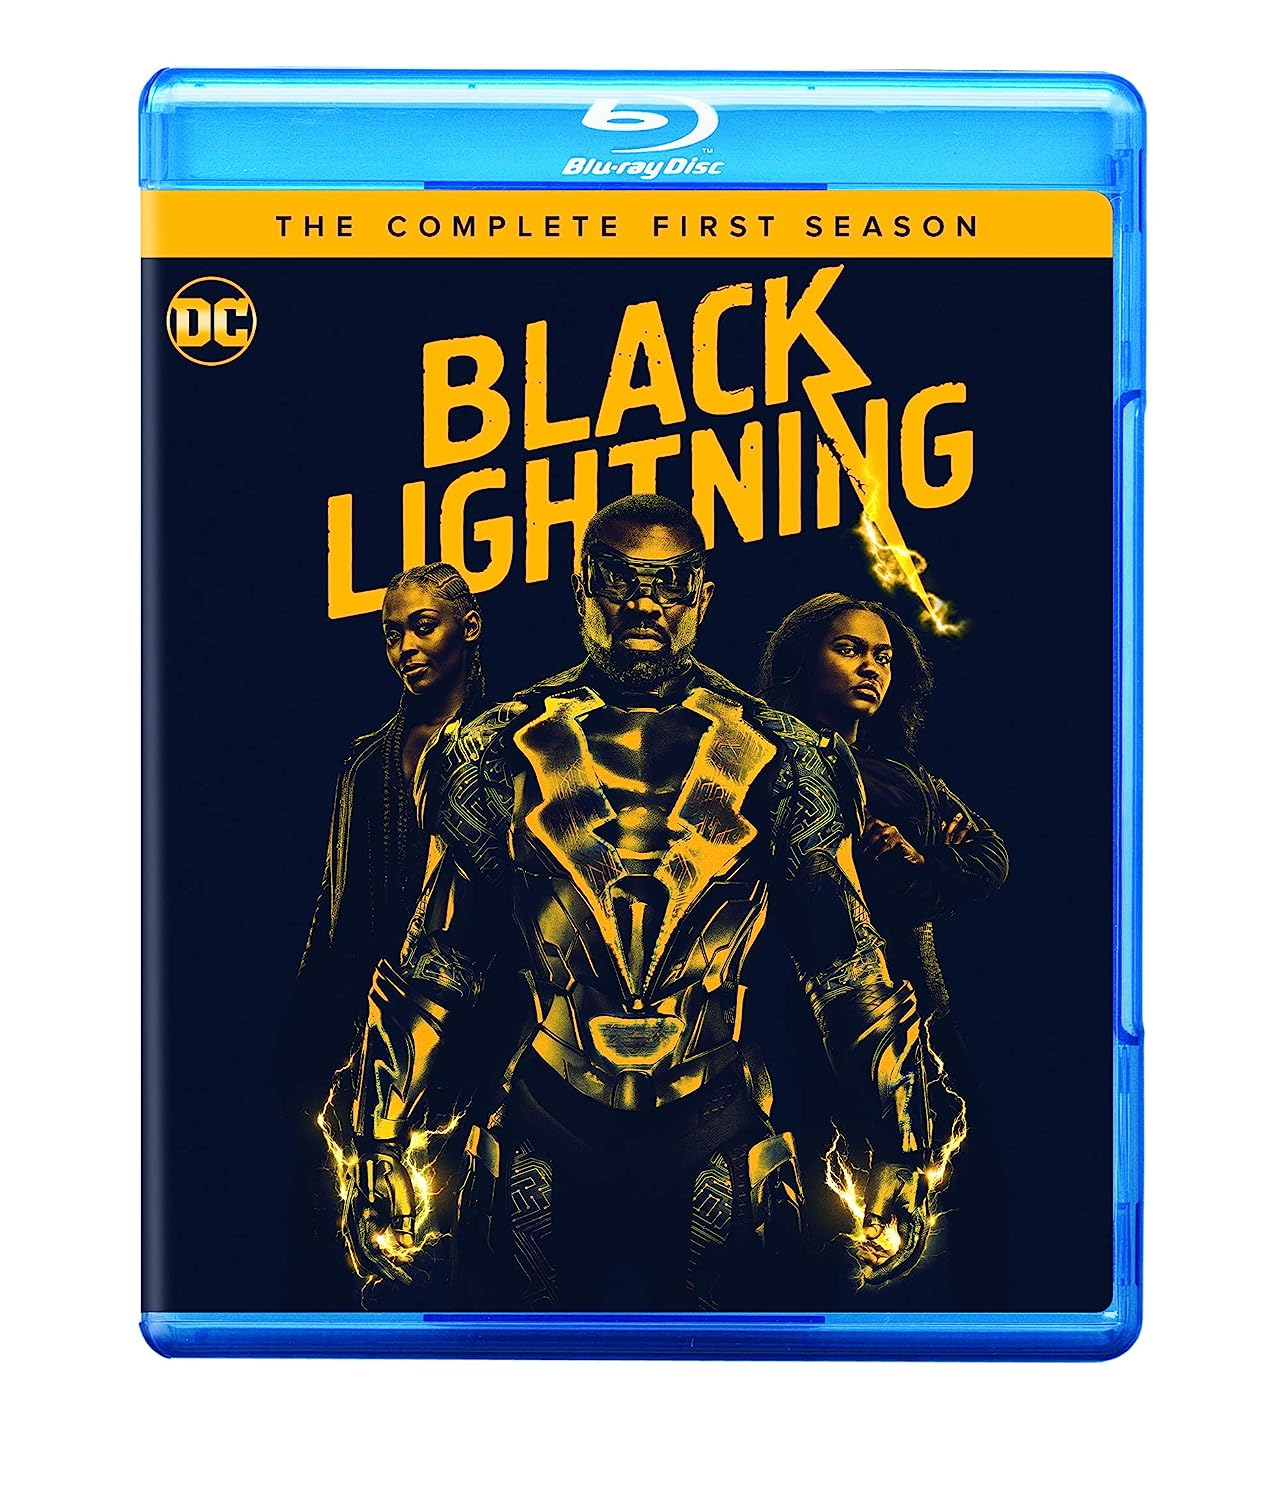 Black Lightning: The Complete First Season - Blu-ray [ 2018 ]  - Sci Fi Television On Blu-ray - TV Shows On GRUV